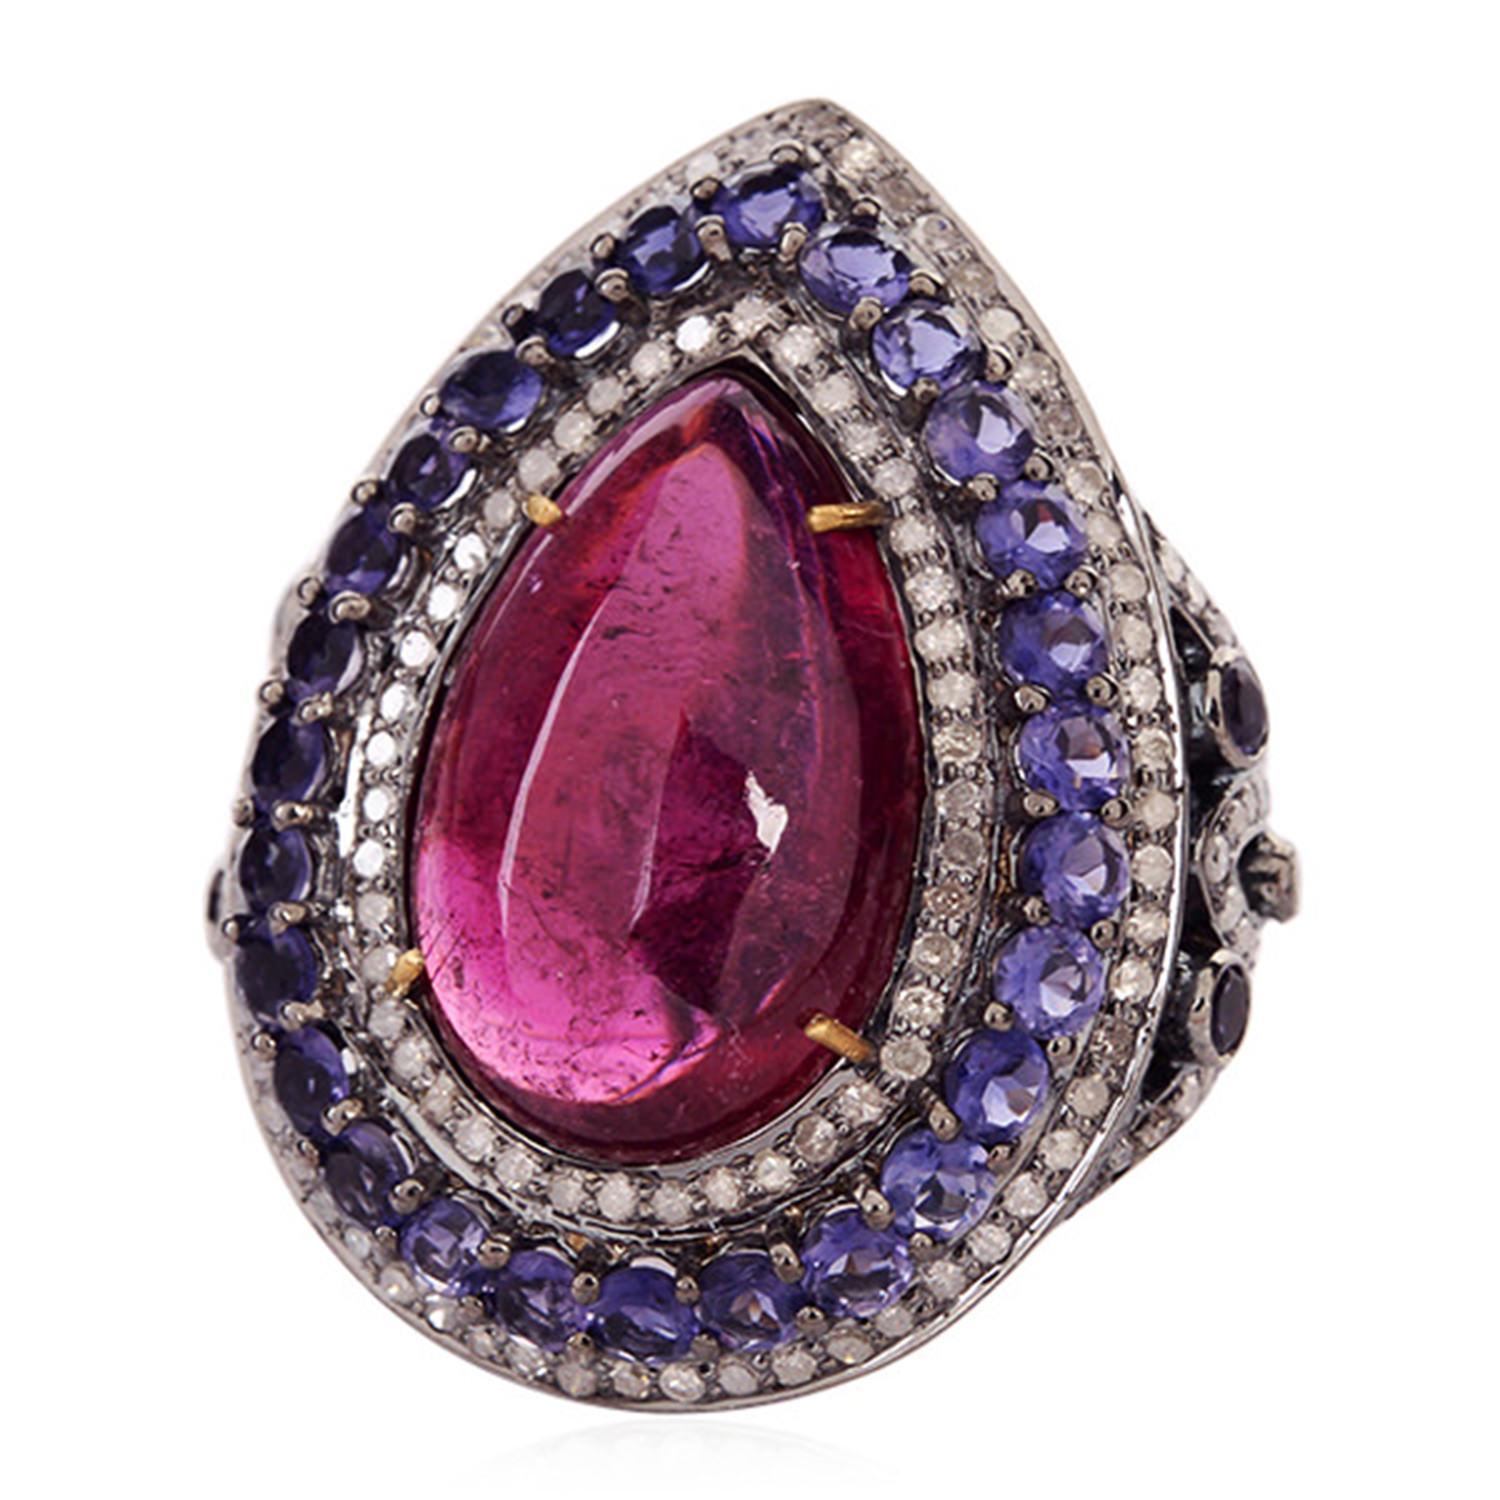 Designer pear shape cabochon red tourmaline diamond Iolite Ring in gold and silver is truly a cocktail ring.

Ring Size: 7 ( Can be sized for a cost )

18KT: 2.63gms
Diamond: 2.05cts
SiIver: 9.36gms
Iolite: 3.25cts
Red Tourmaline: 18.4cts
